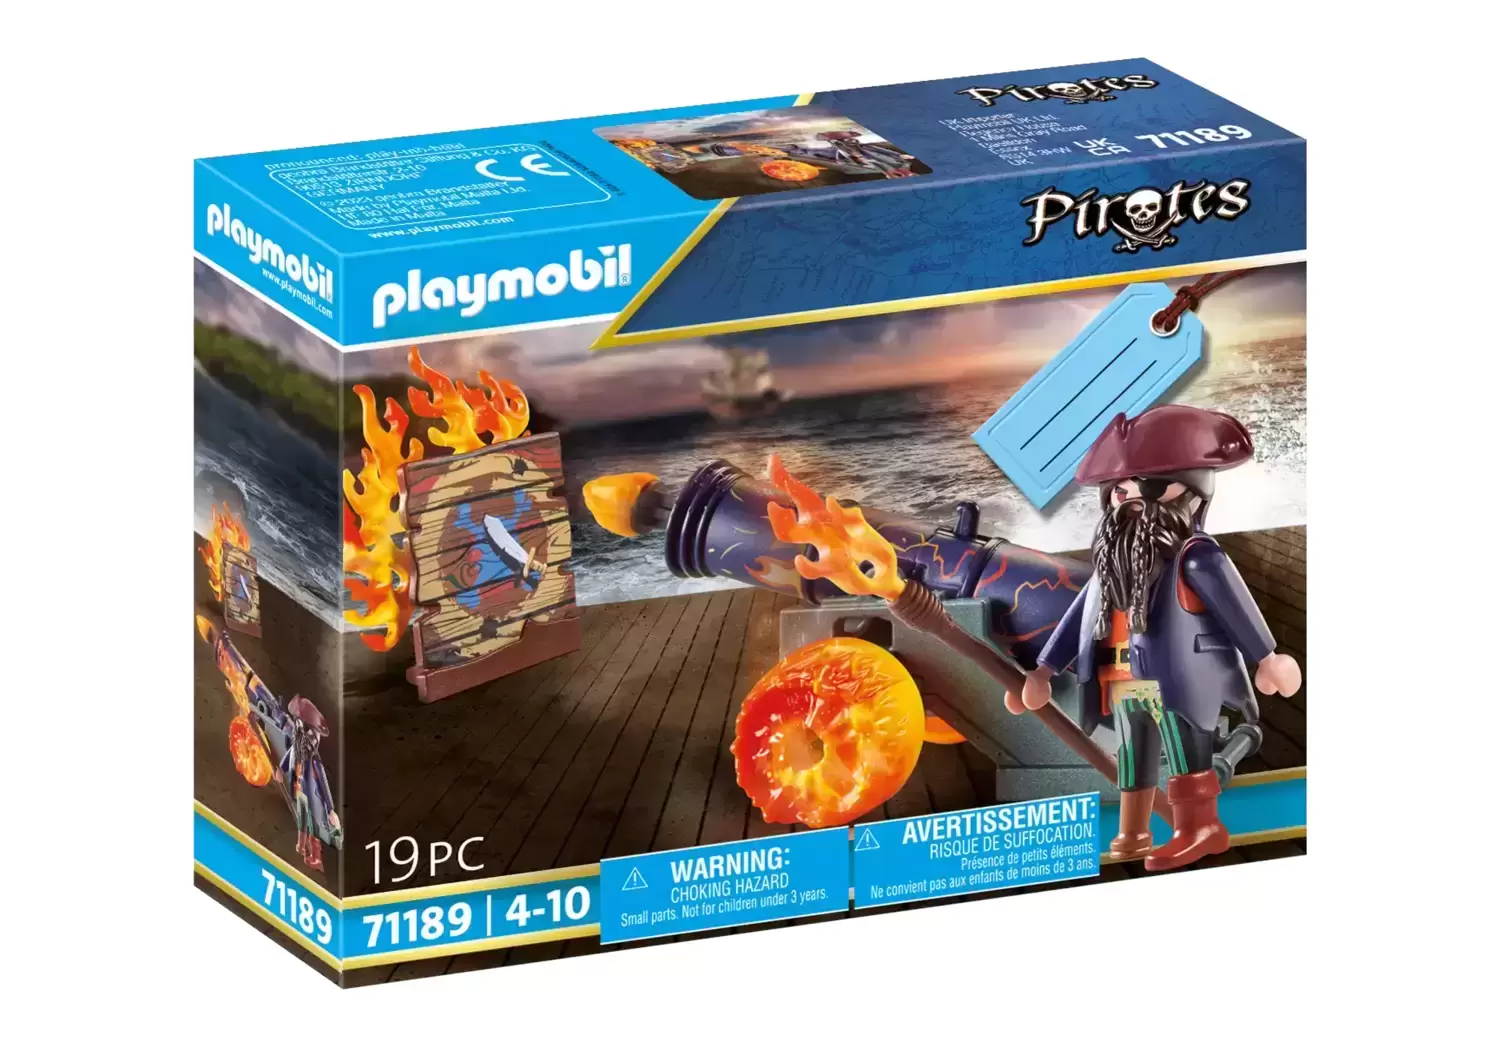 Pirate Playmobil - Pirate with Cannon Gift Set